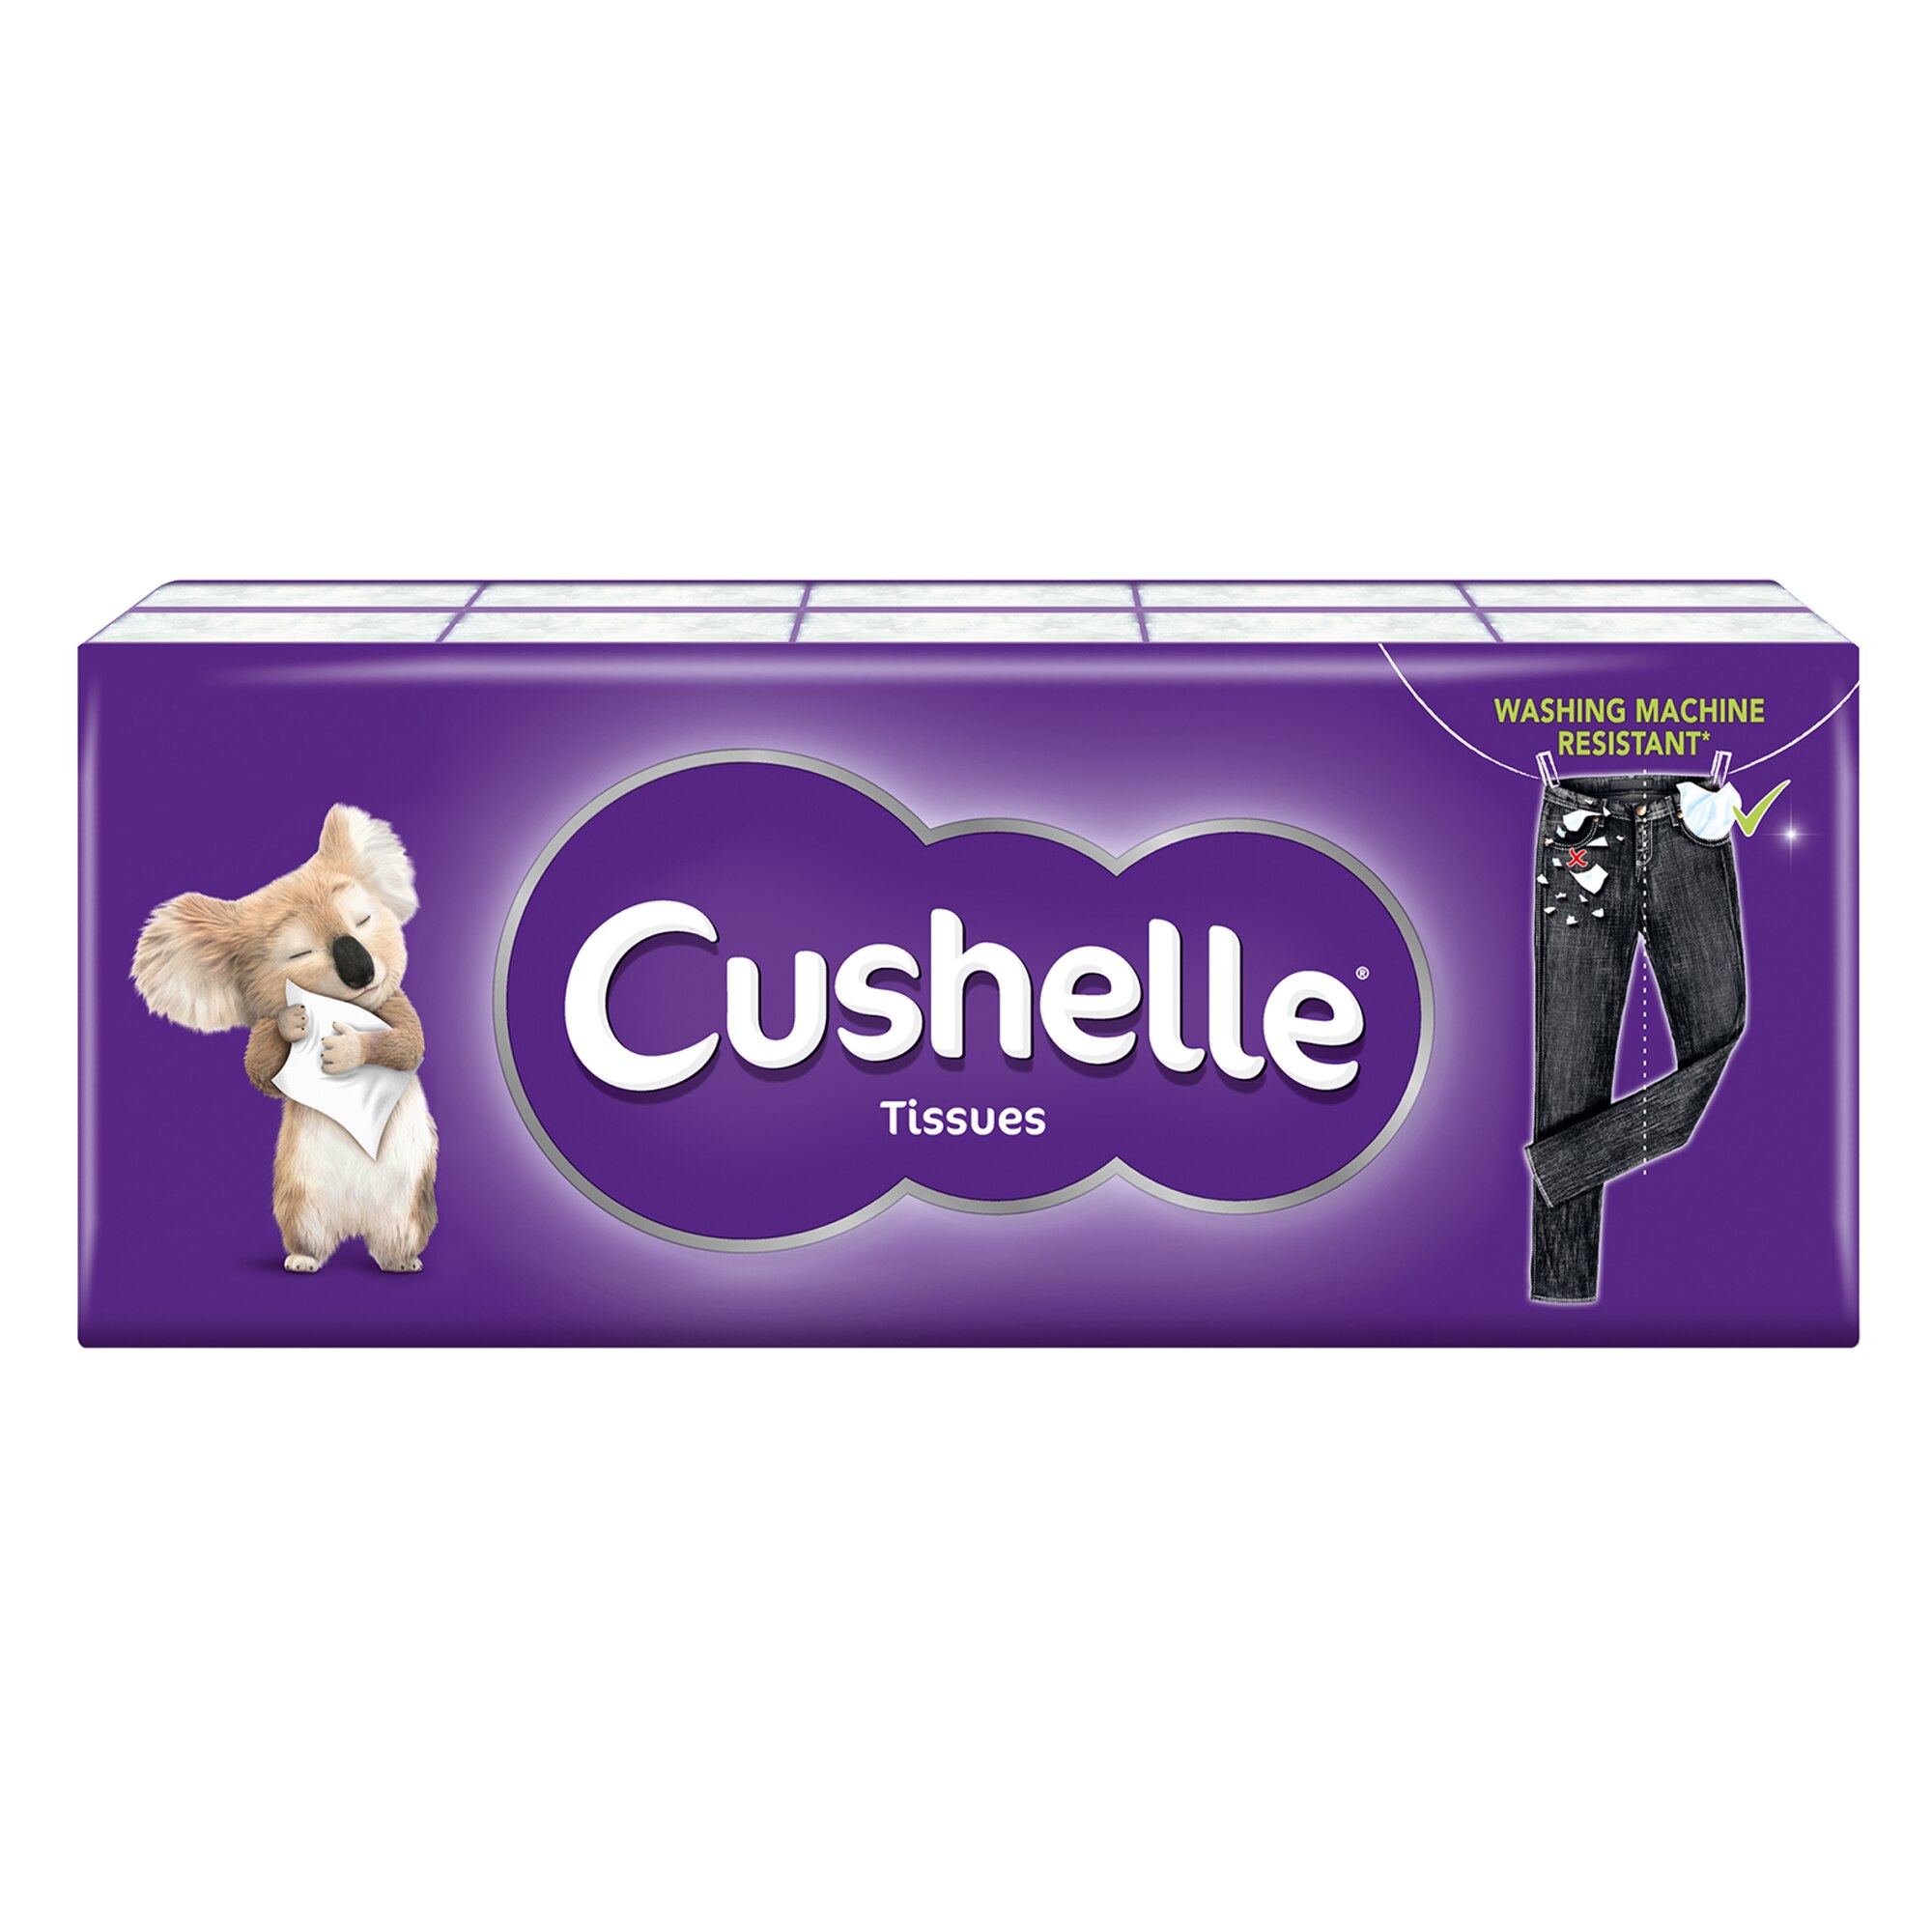 Cushelle Premium Soft Strong Facial Tissues Pack of 6 Boxes x 80 Sheets 